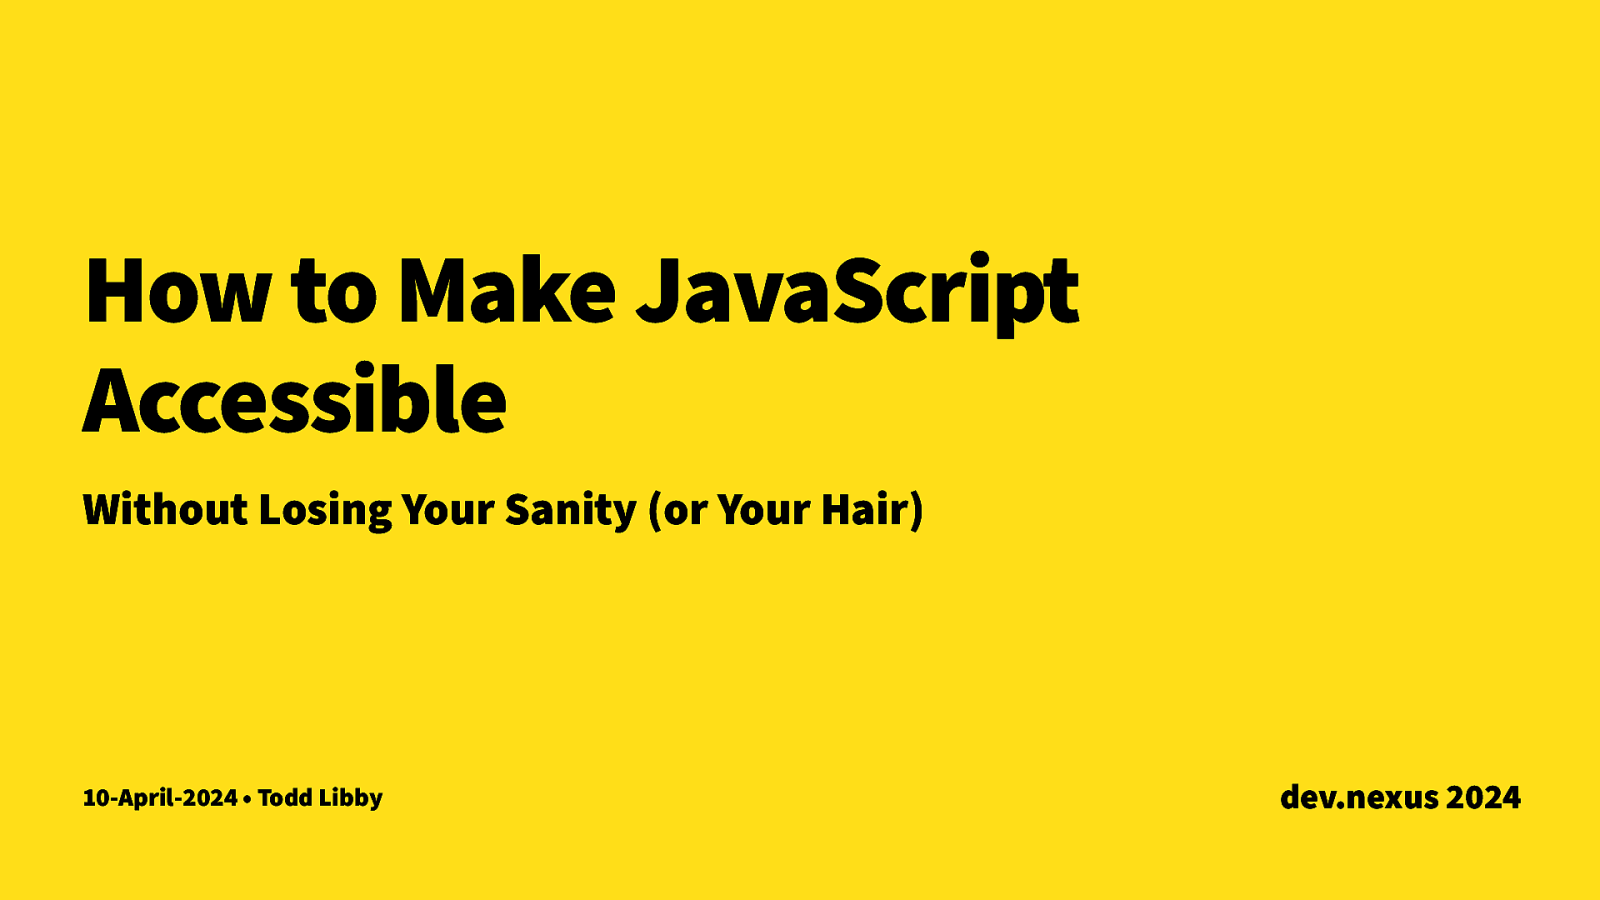 How to Make your JavaScript Accessible Without Losing Your Sanity (or your Hair)